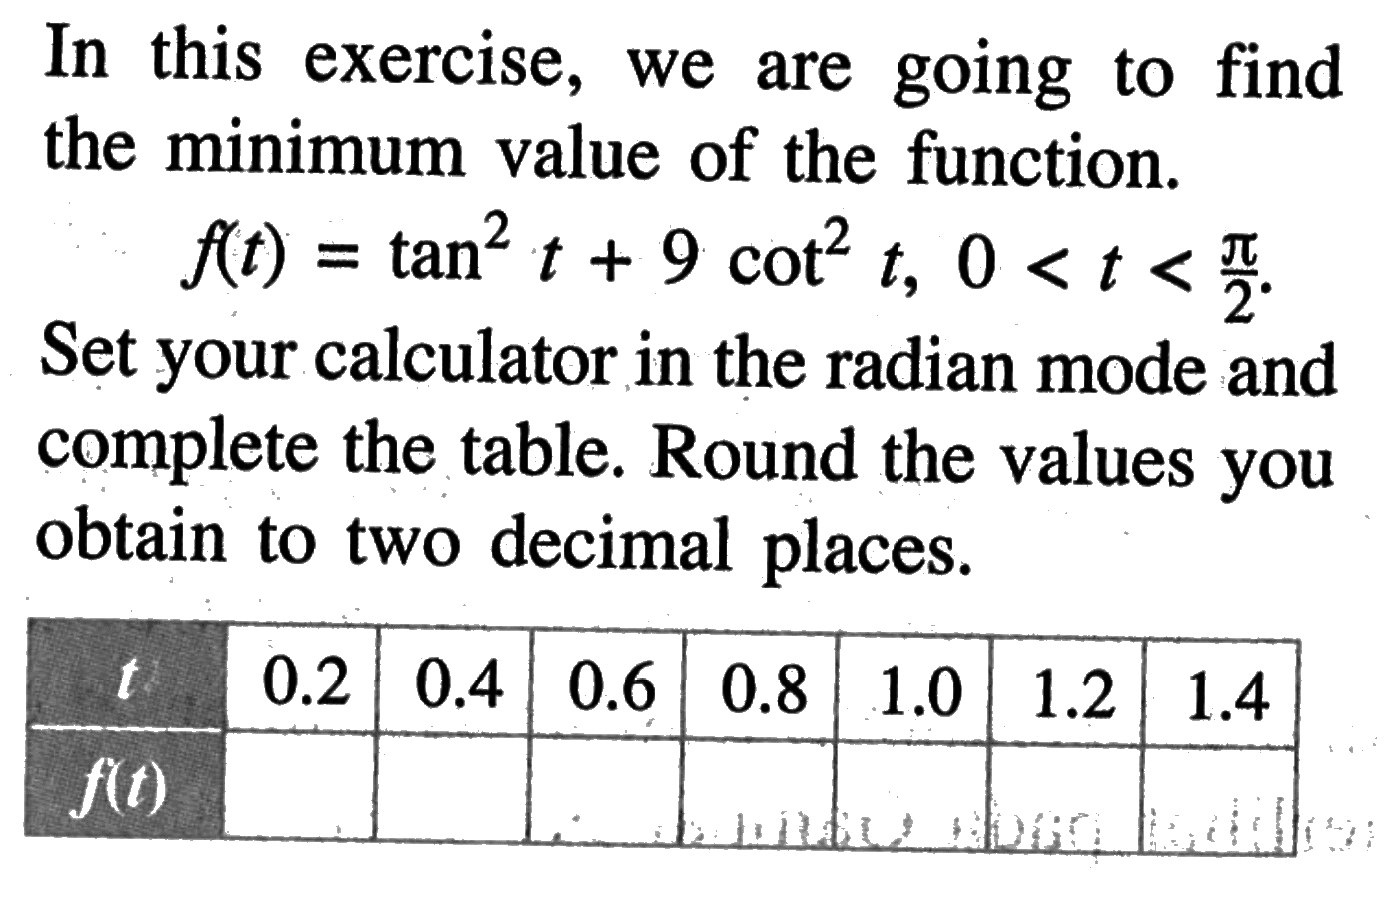 In this exercise, we are going to find the minimum value of the function. f(t)=tan^2 t+9 cot ^2 t, 0<t<pi/2 . Set your calculator in the radian mode and complete the table. Round the values you obtain to two decimal places. t 0.2 0.4 0.6 0.8 1.0 1.2 1.4 f(t) 